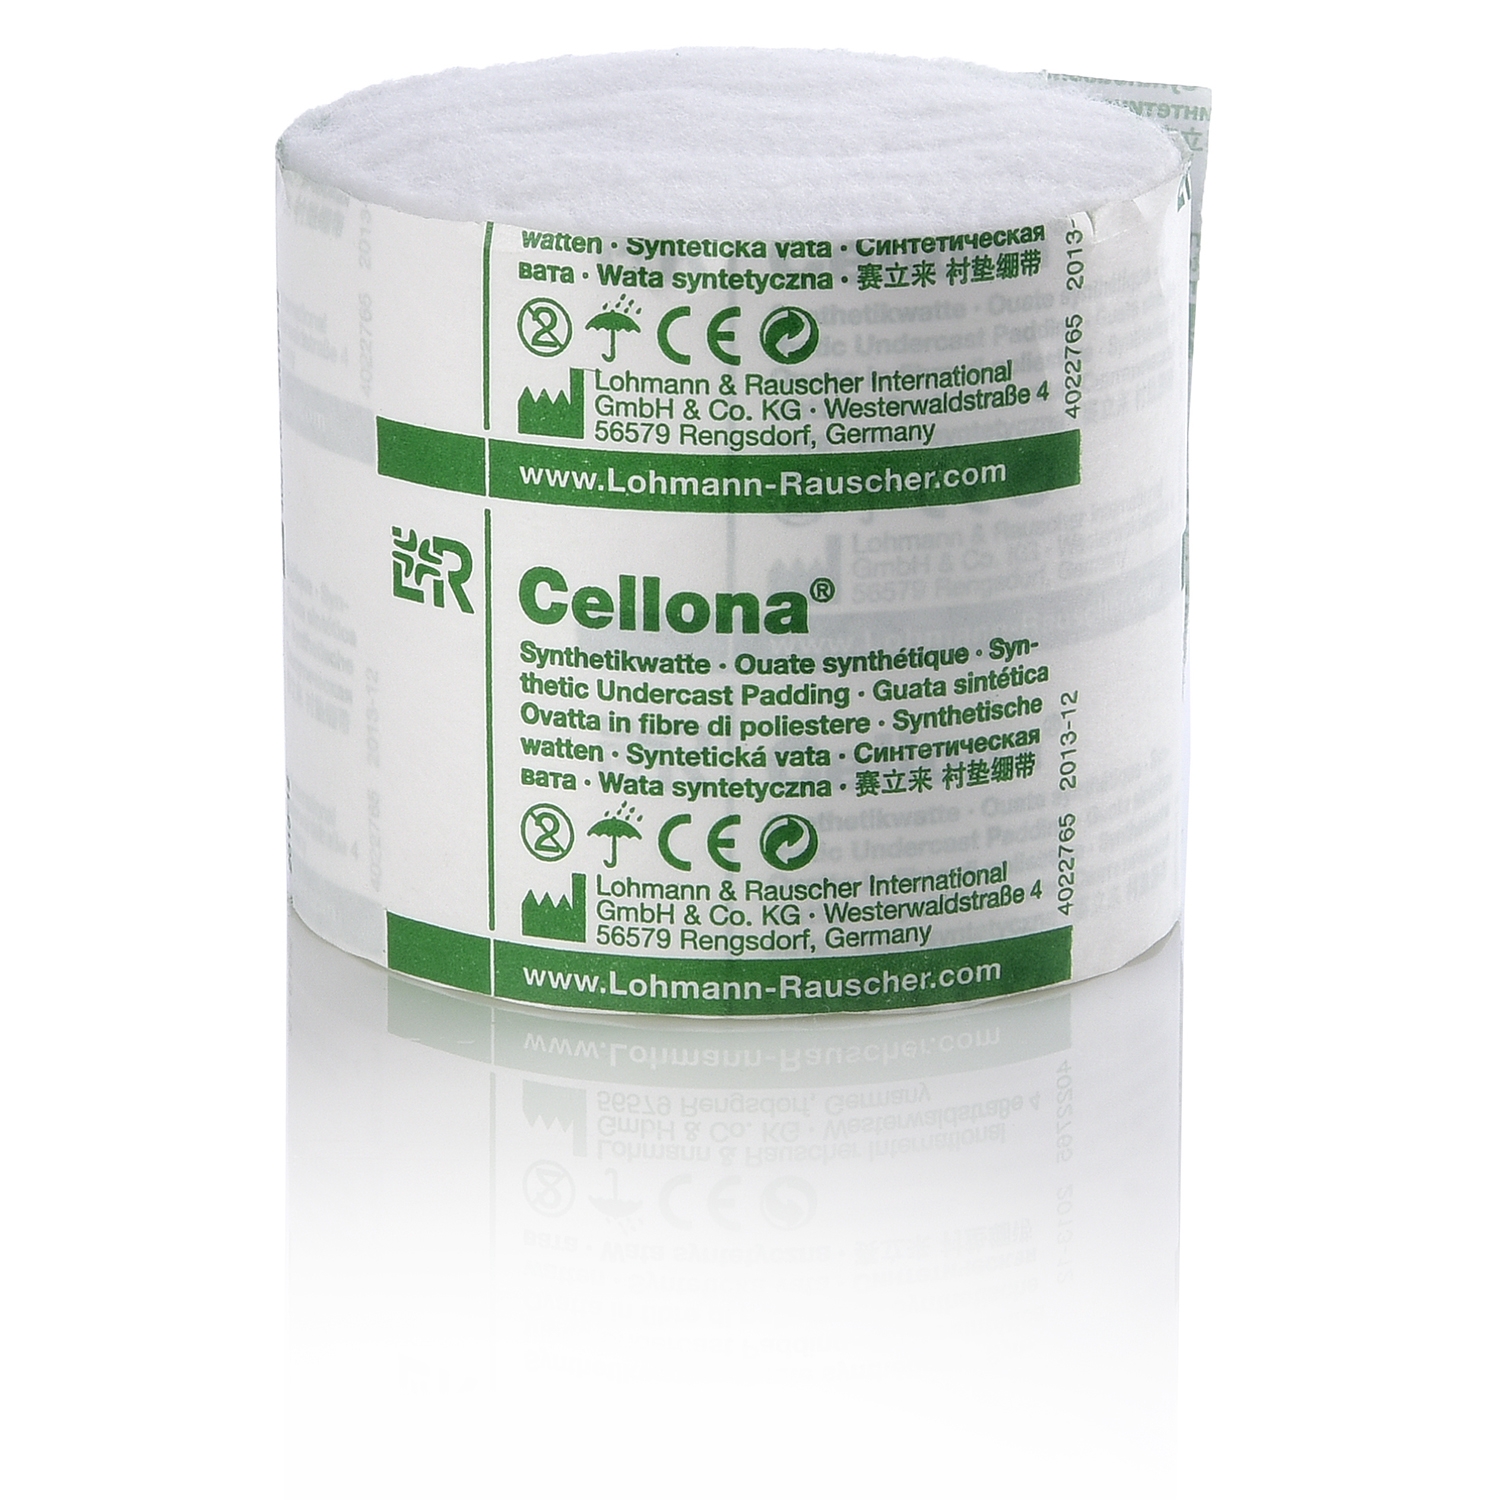 Cellona Ouate synthétique 6 cm x 3 m